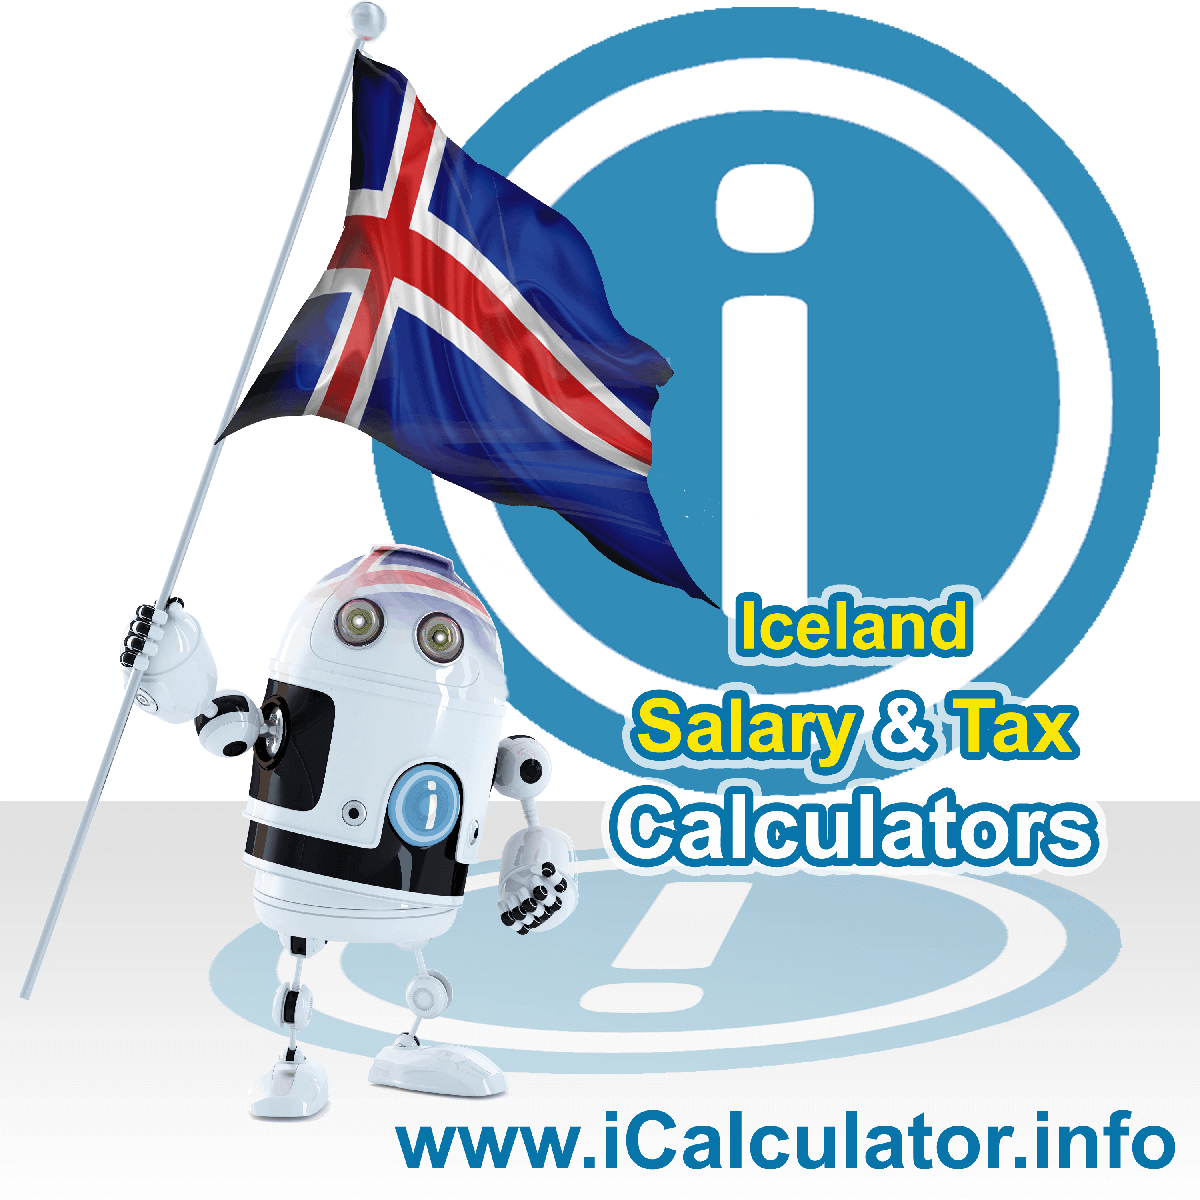 Iceland Salary Calculator. This image shows the Icelandese flag and information relating to the tax formula for the Iceland Tax Calculator